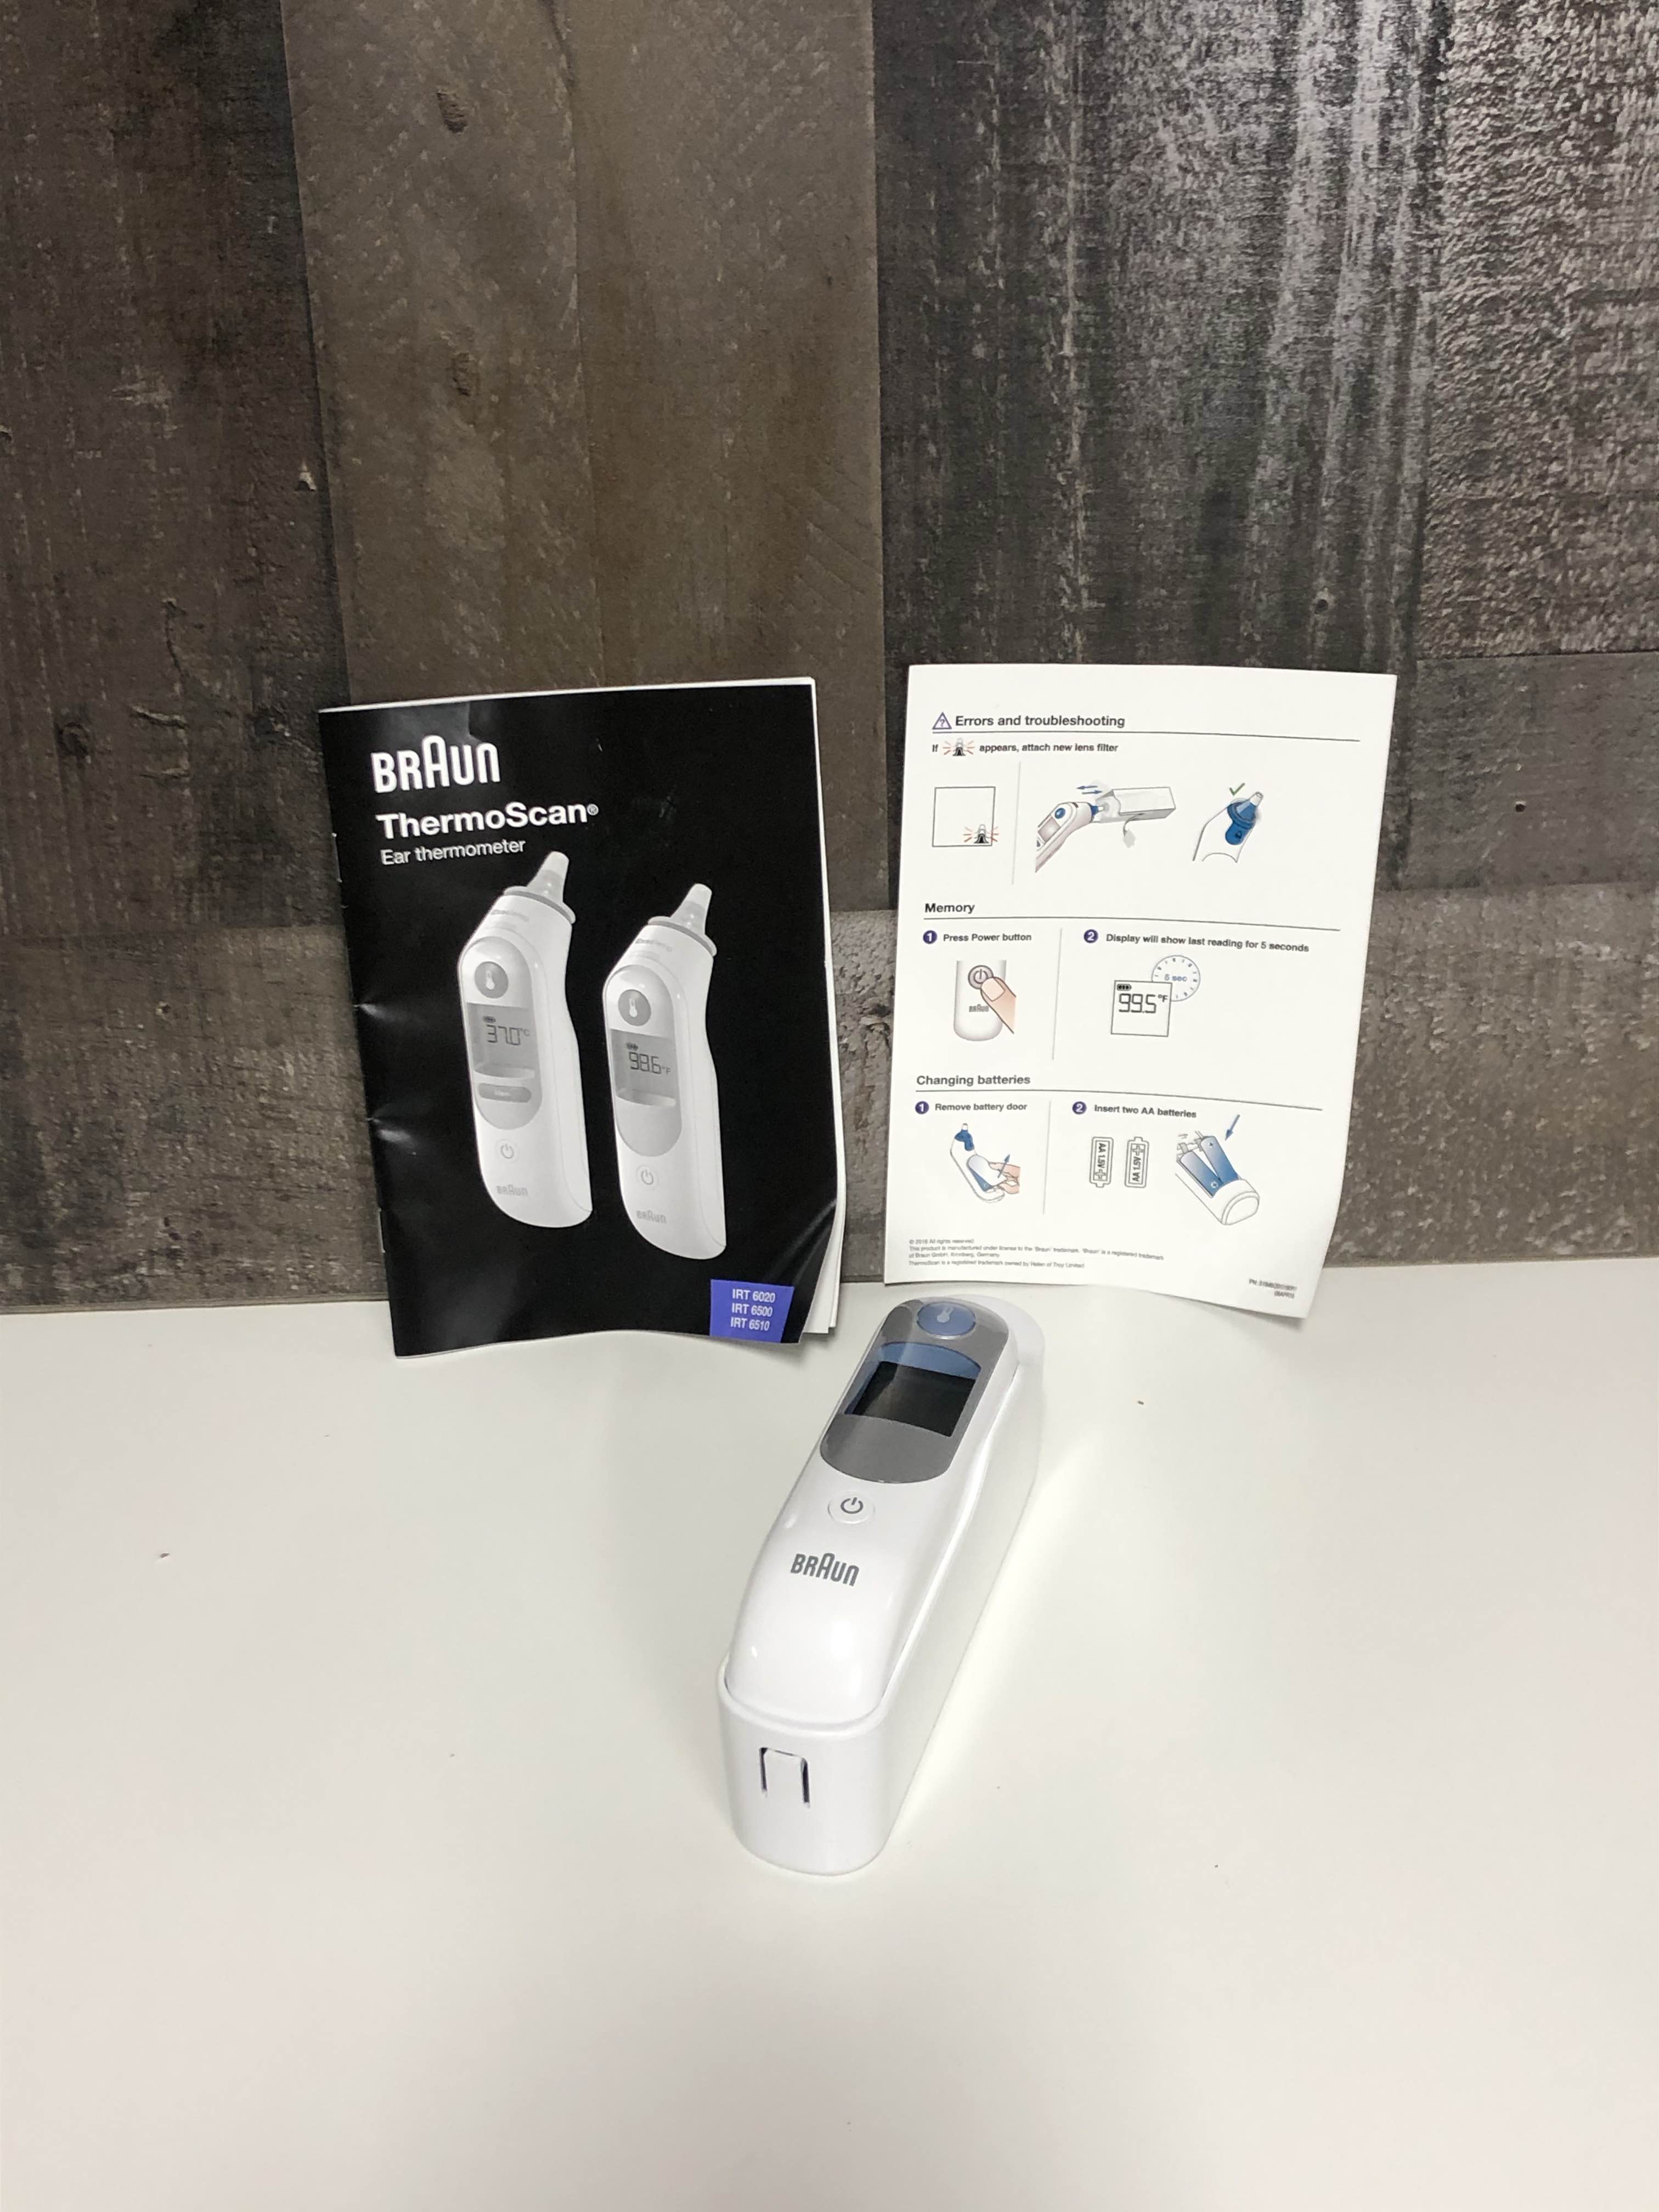 Braun Thermoscan 5 IRT6500 Thermometer Review - Consumer Reports